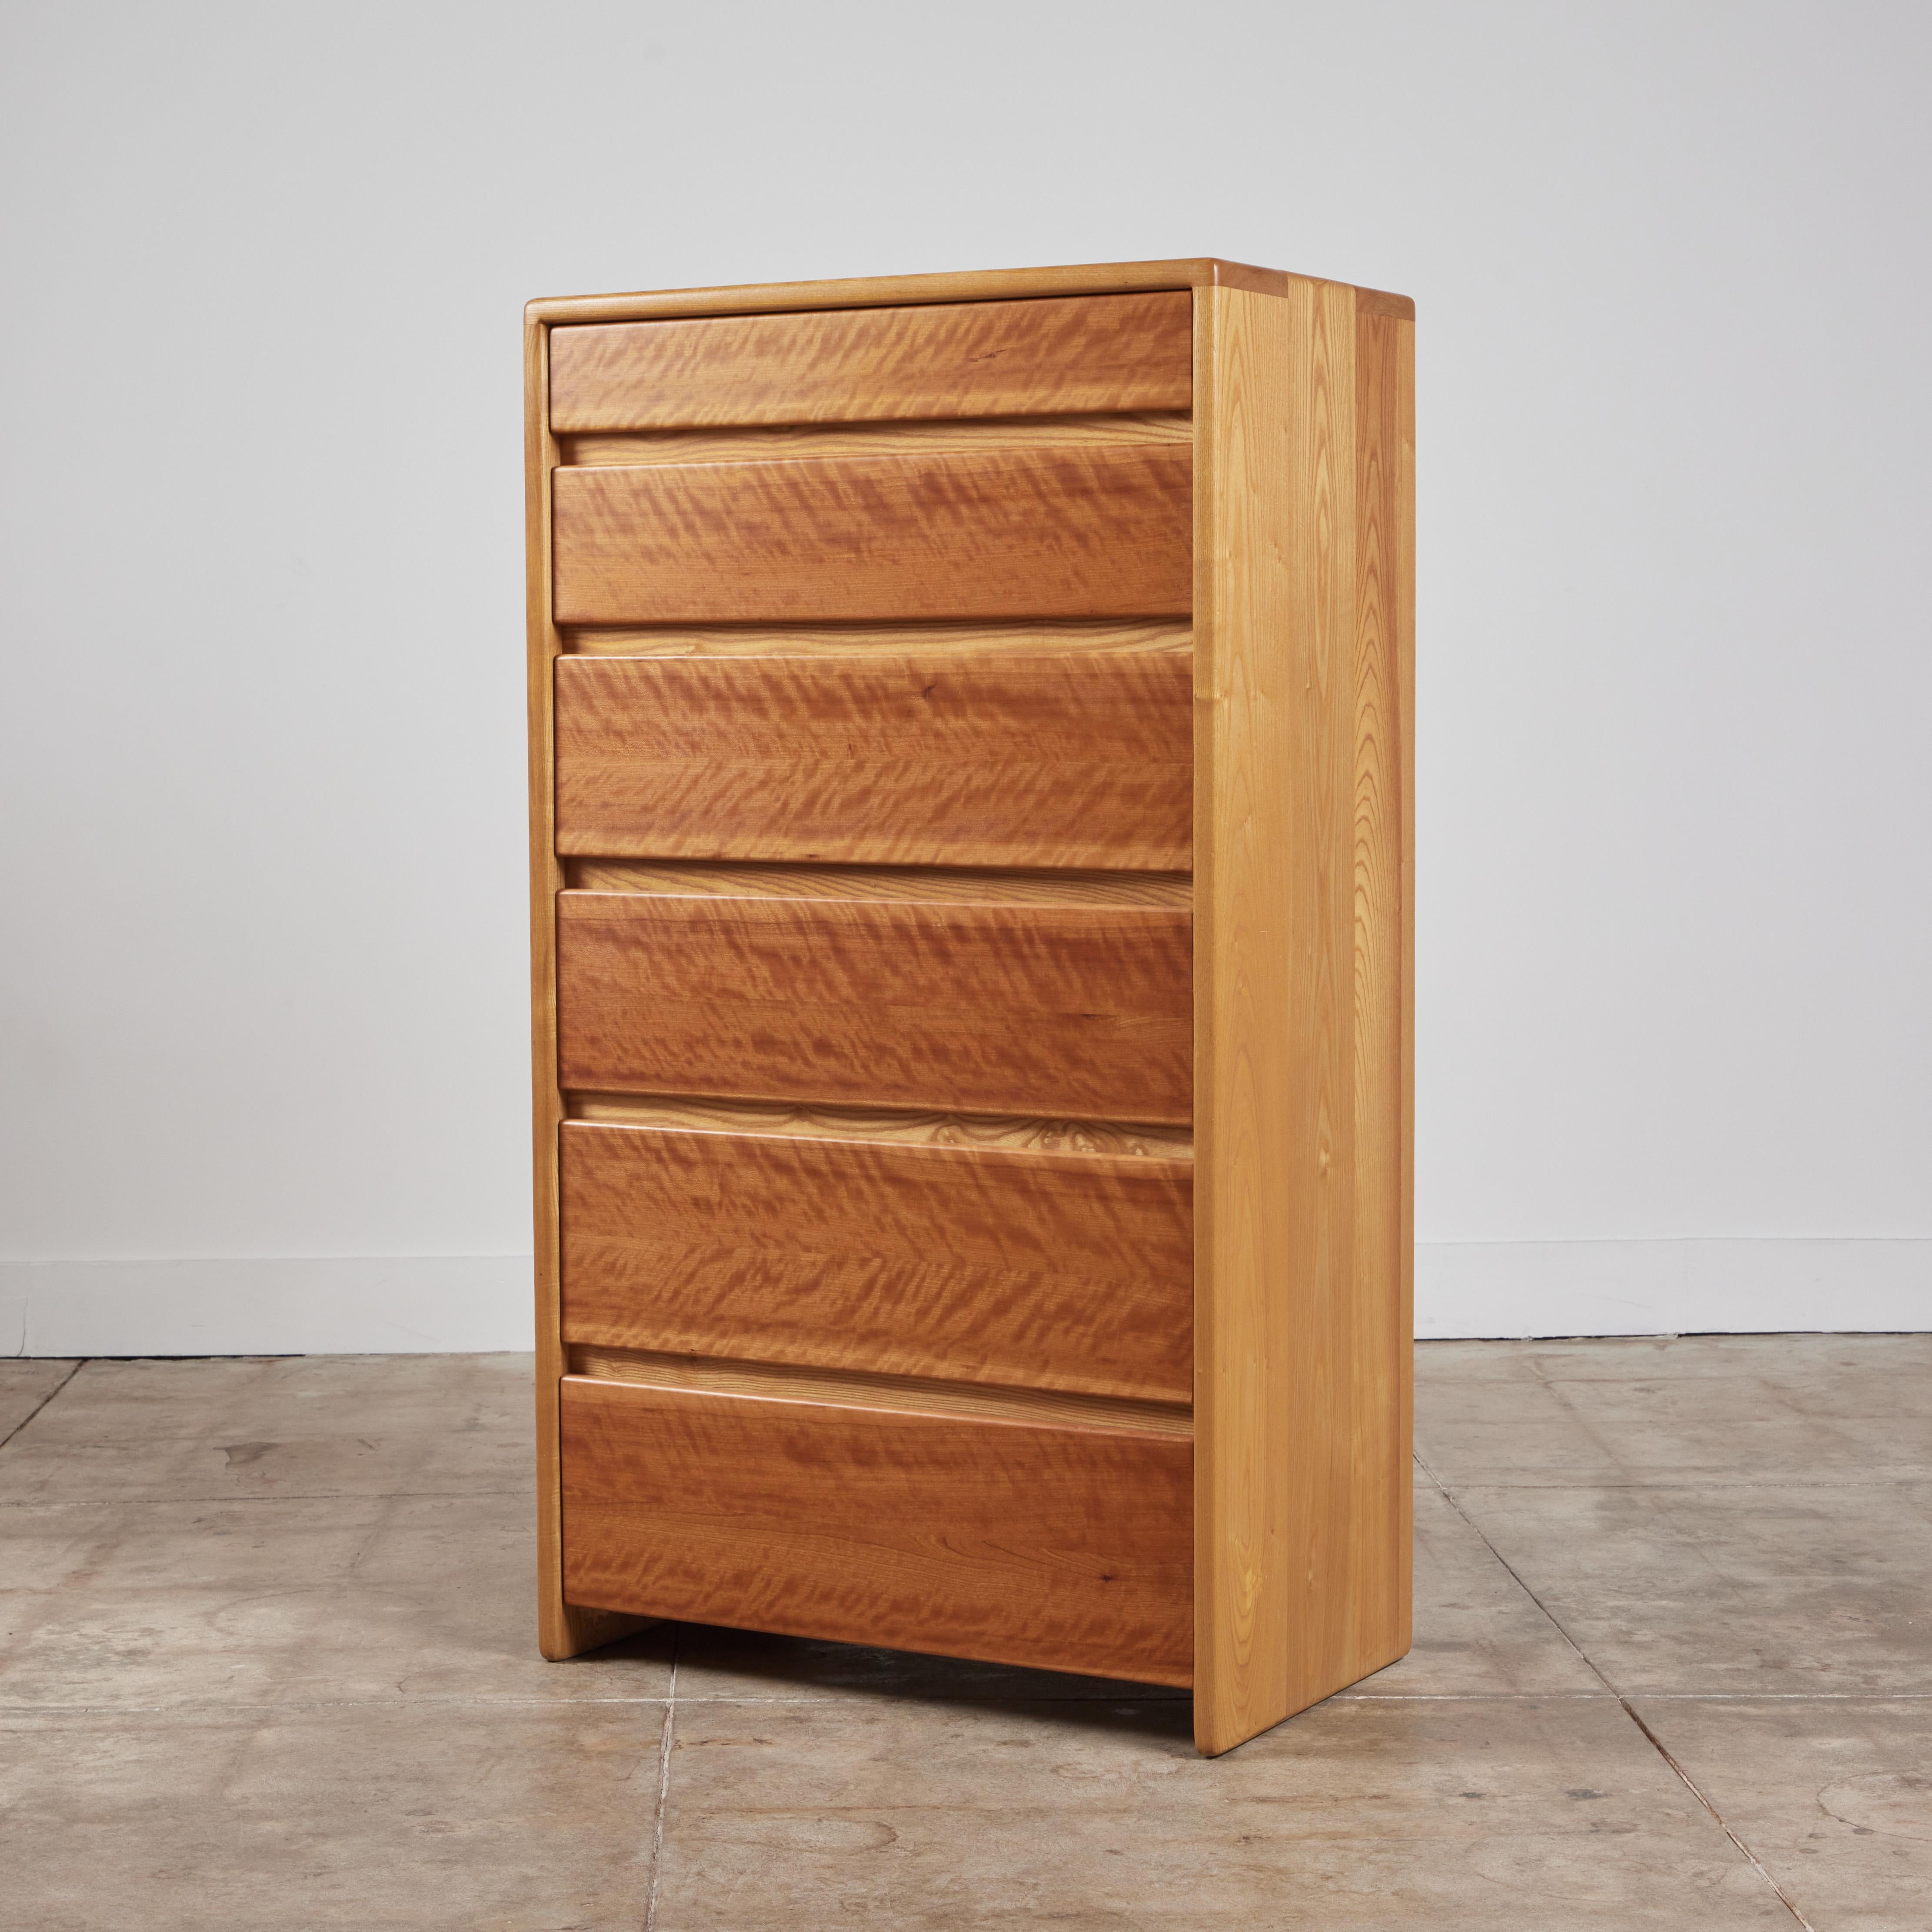 Tall dresser by Gerald McCabe for Eon Furniture, c.1997, USA. The maple dresser, features soft rounded edges with finger joinery detailing at the edges. The six flat front drawers feature maple drawer fronts. This piece is personally signed by Jerry